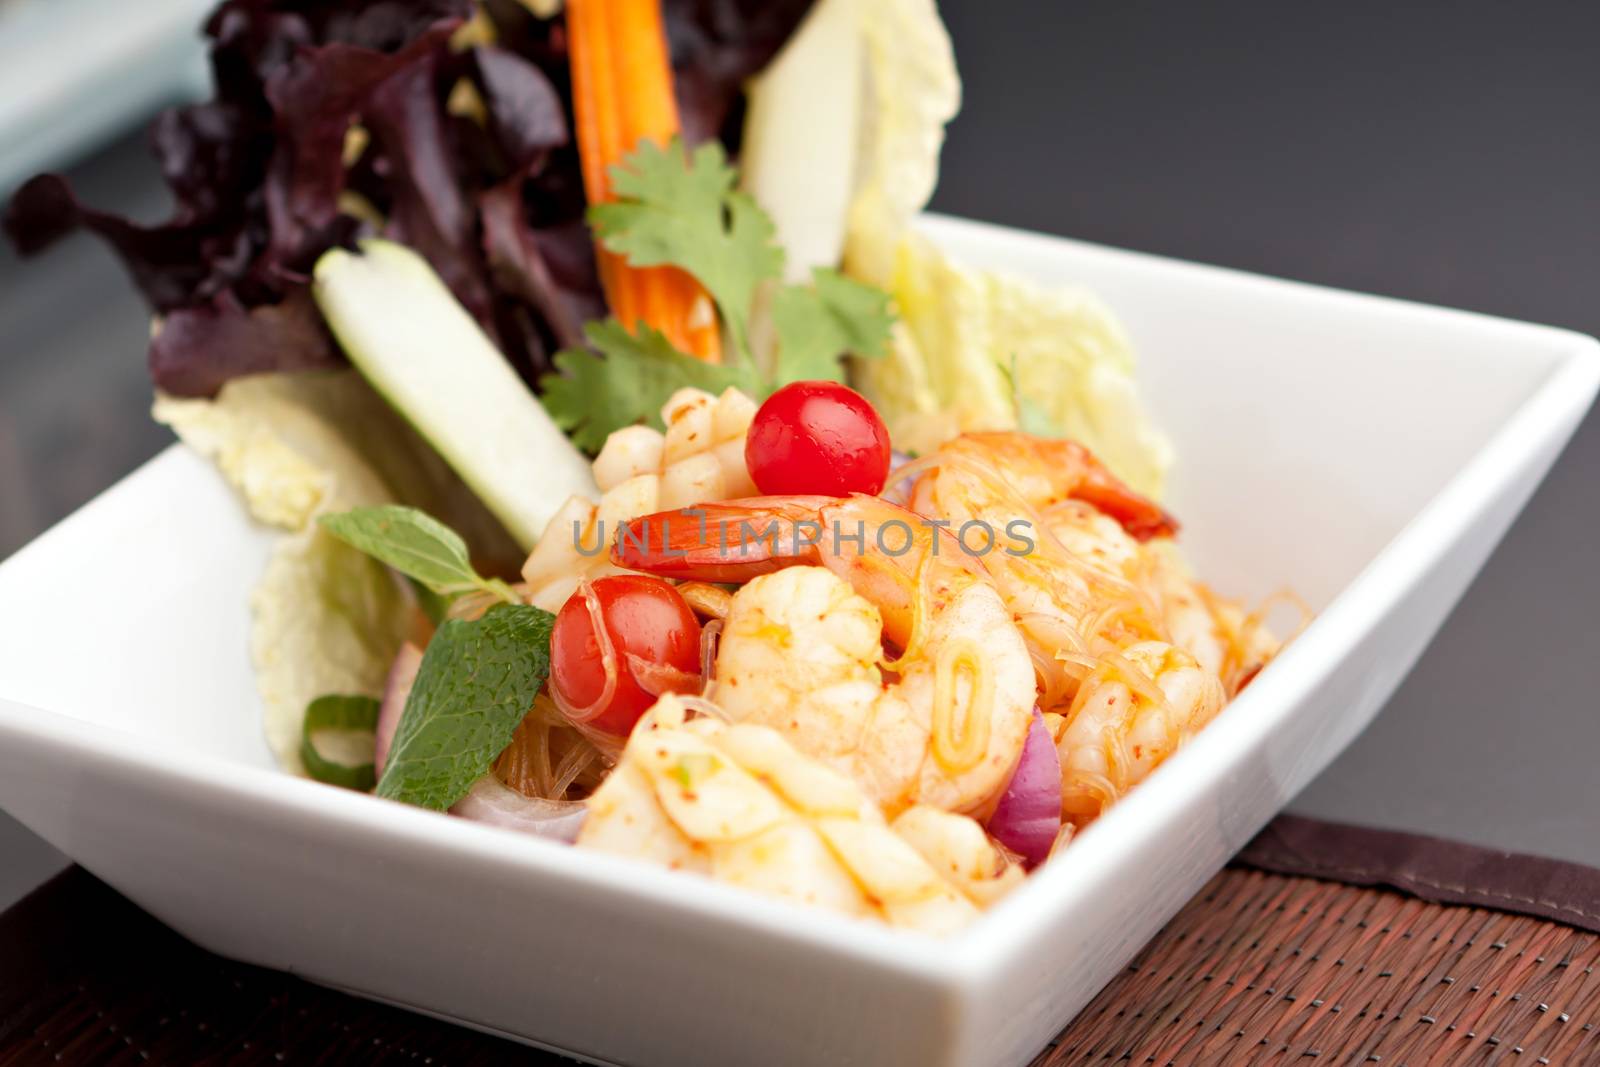 Thailand style seafood salad with clear vermicelli style rice noodles and veggies.